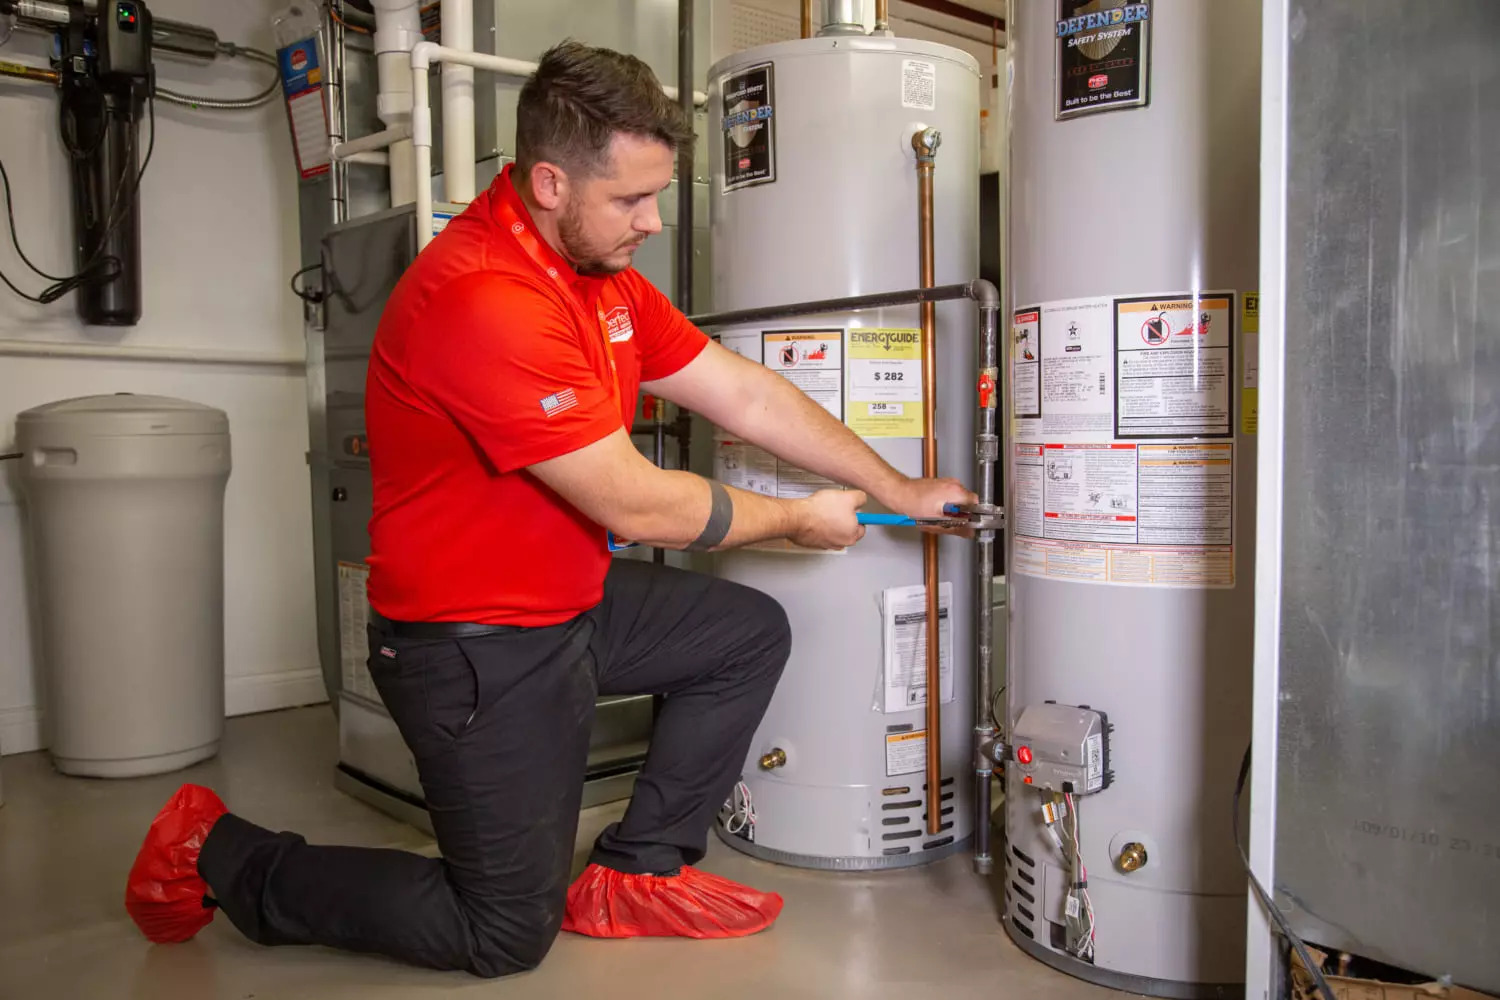 How To Light An Electric Water Heater